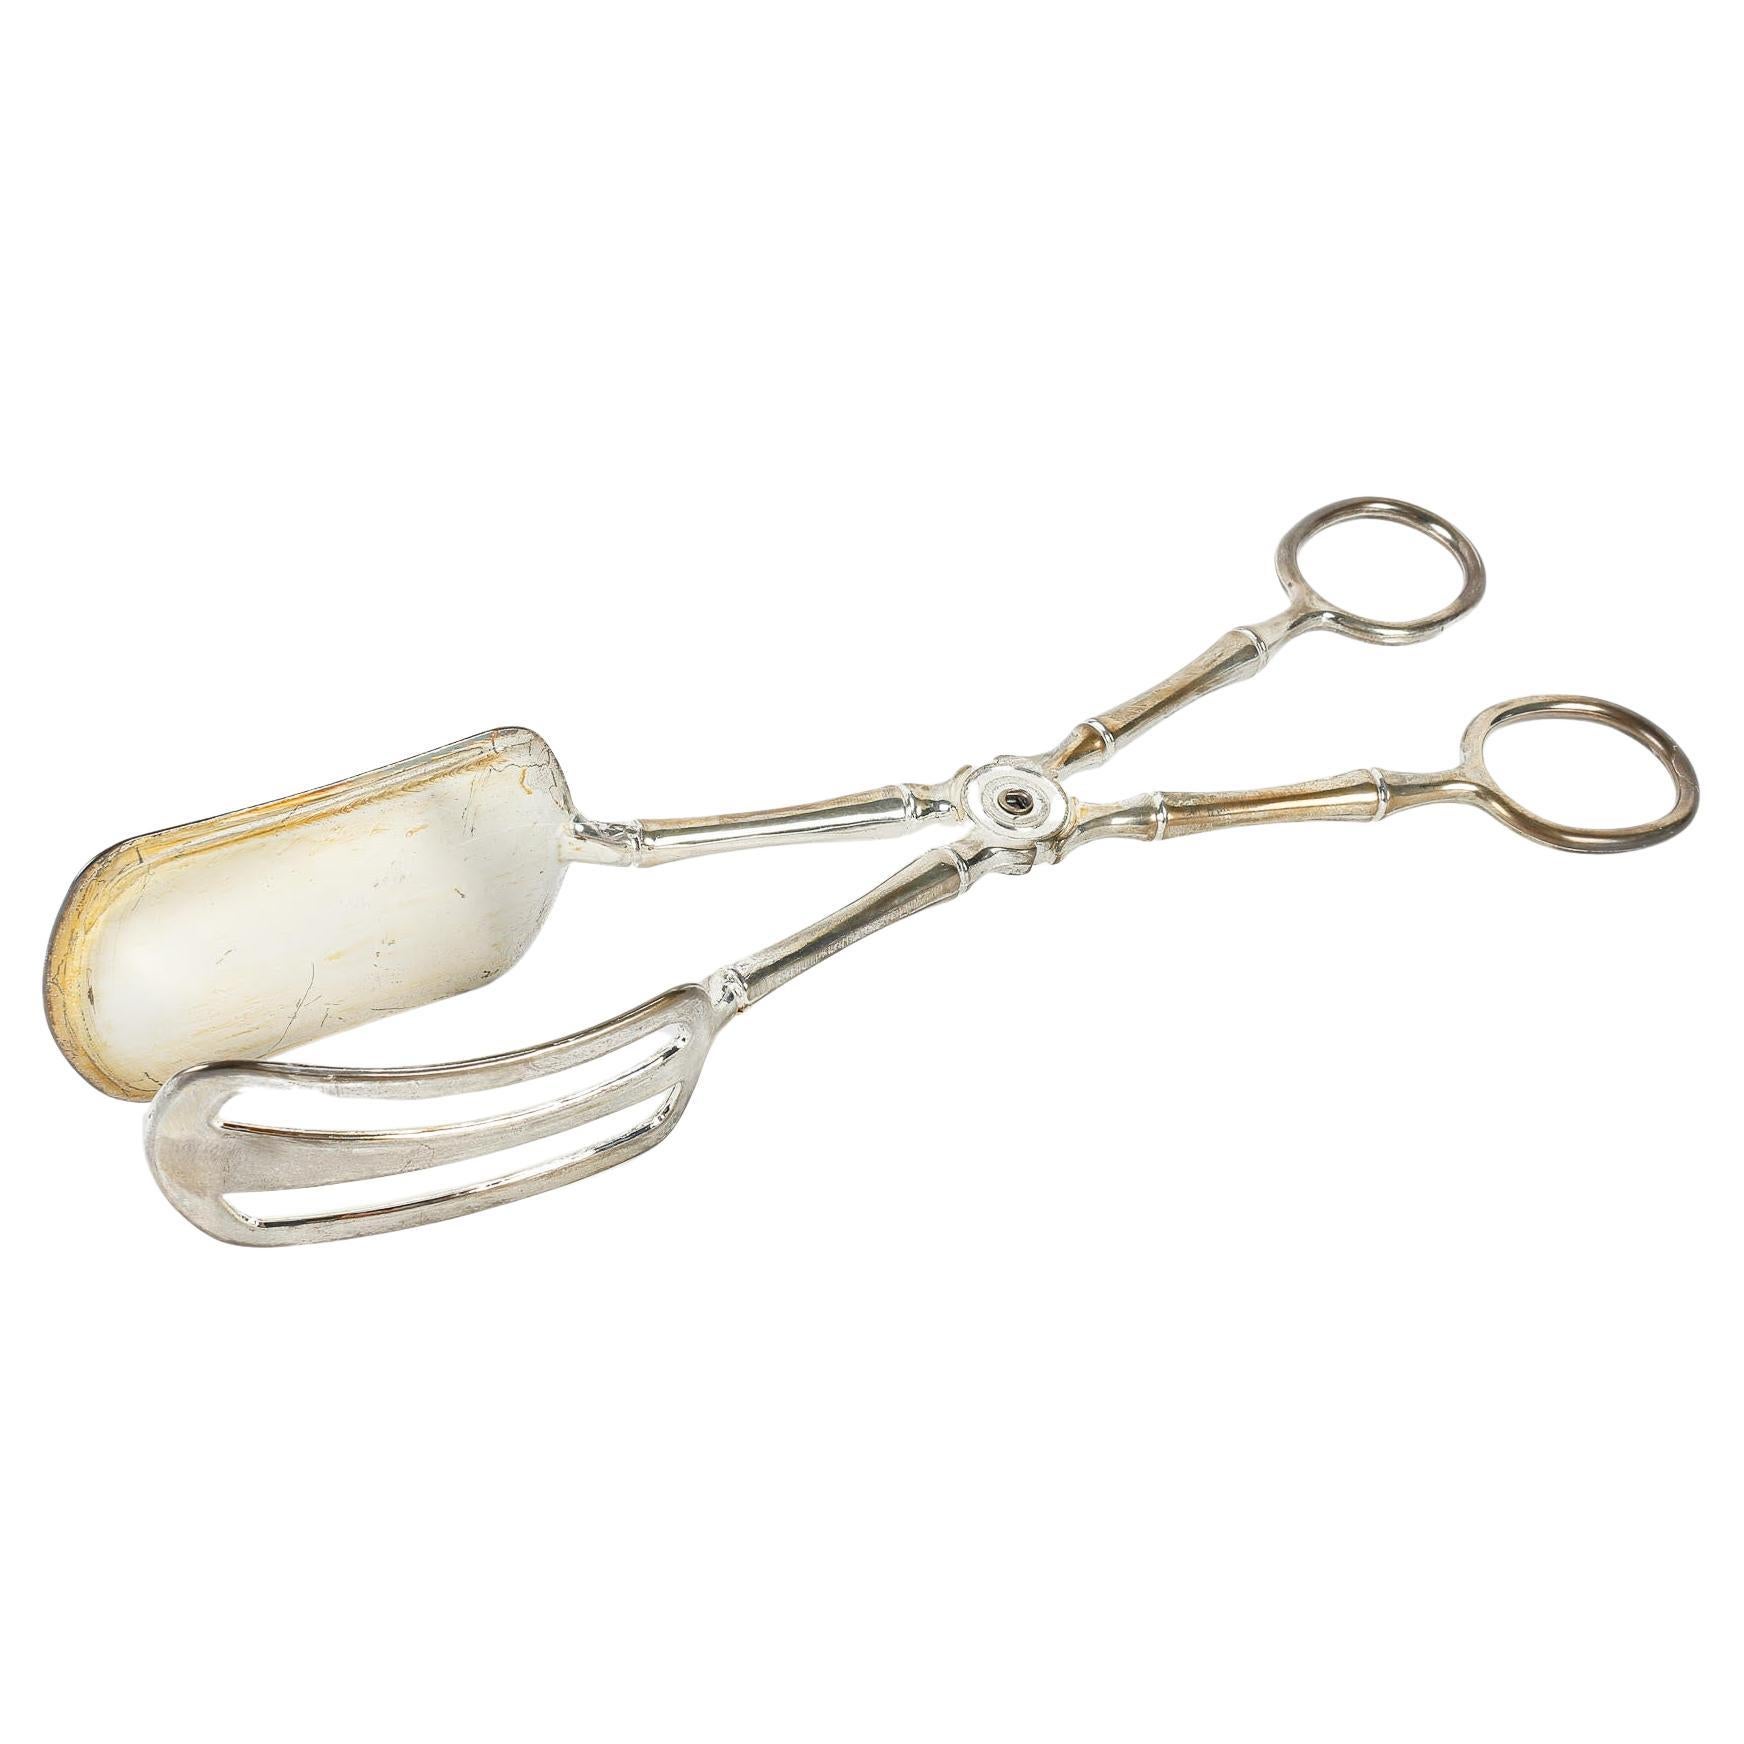 Silver Plated Cake Server, Mid 20th Century.